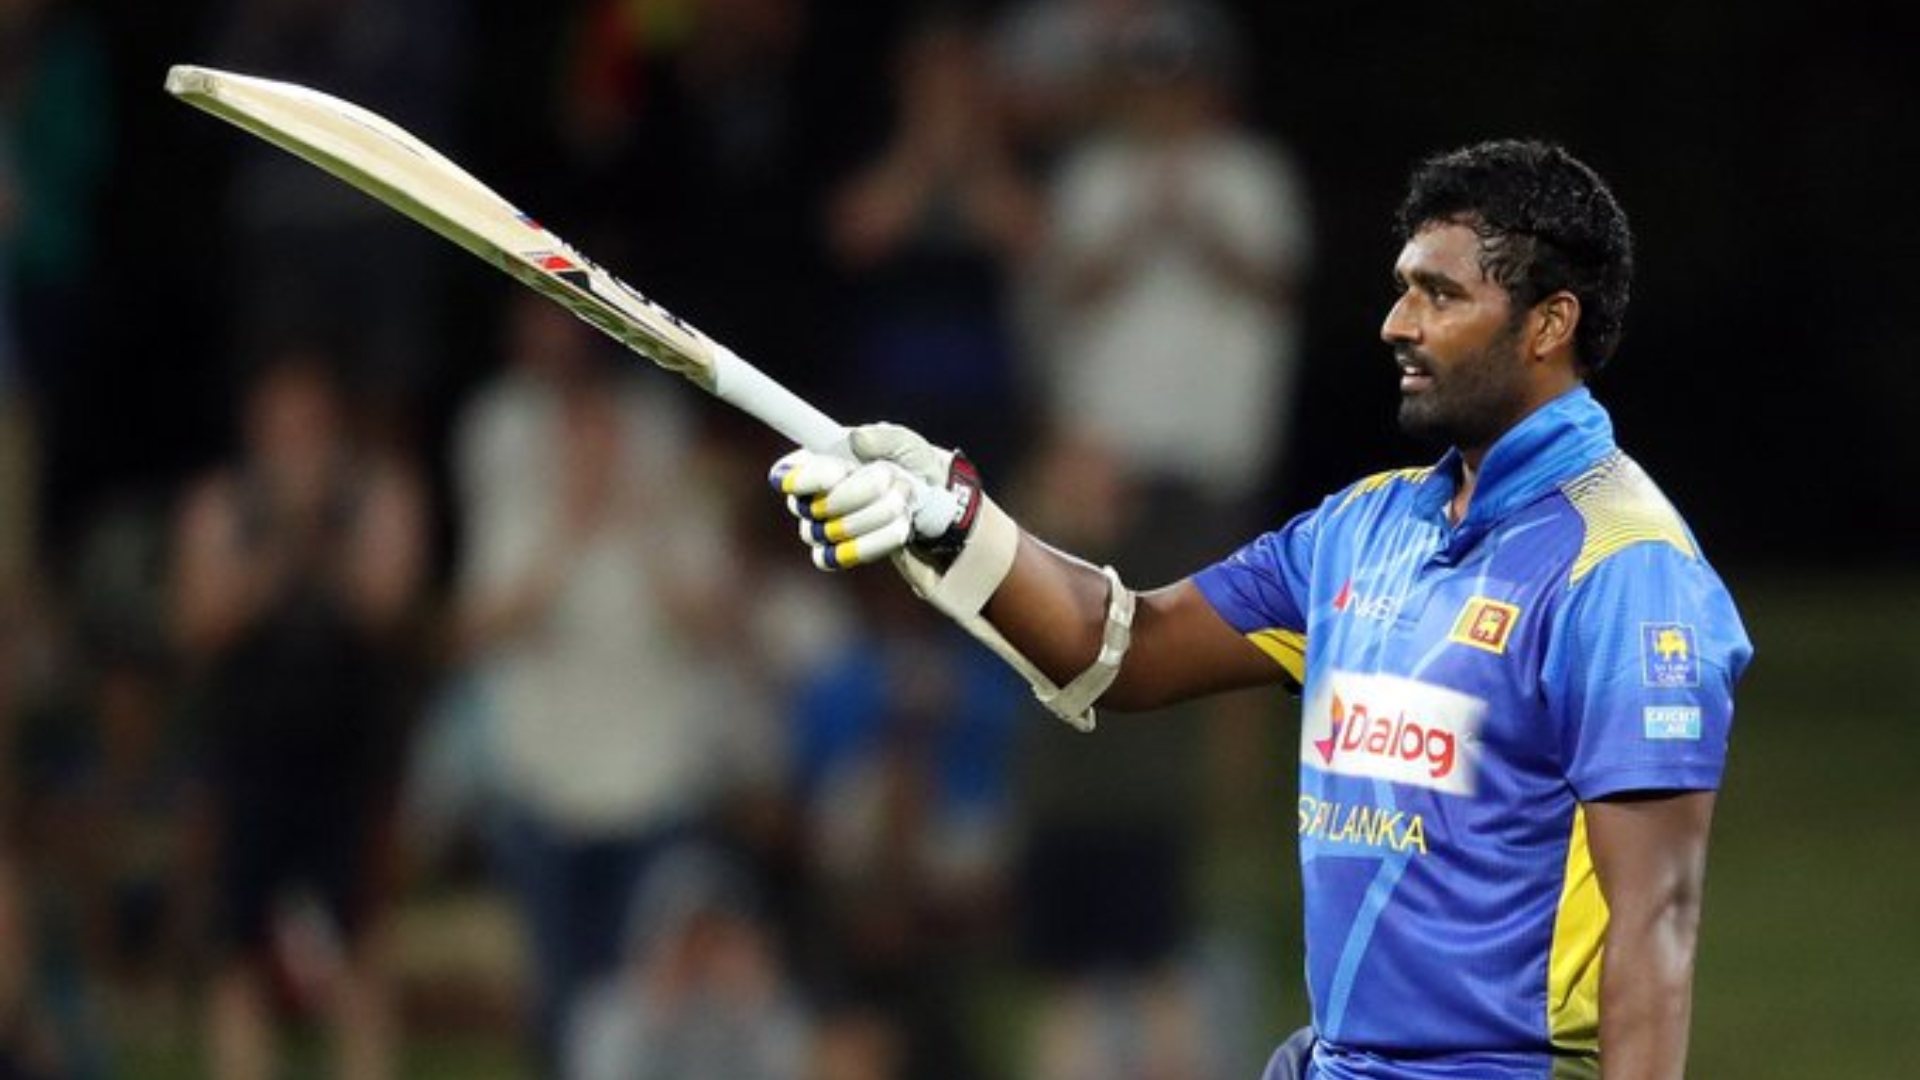 Thisara Perera is best remembered for his knock of 140 off 73 balls that included 13 sixes.